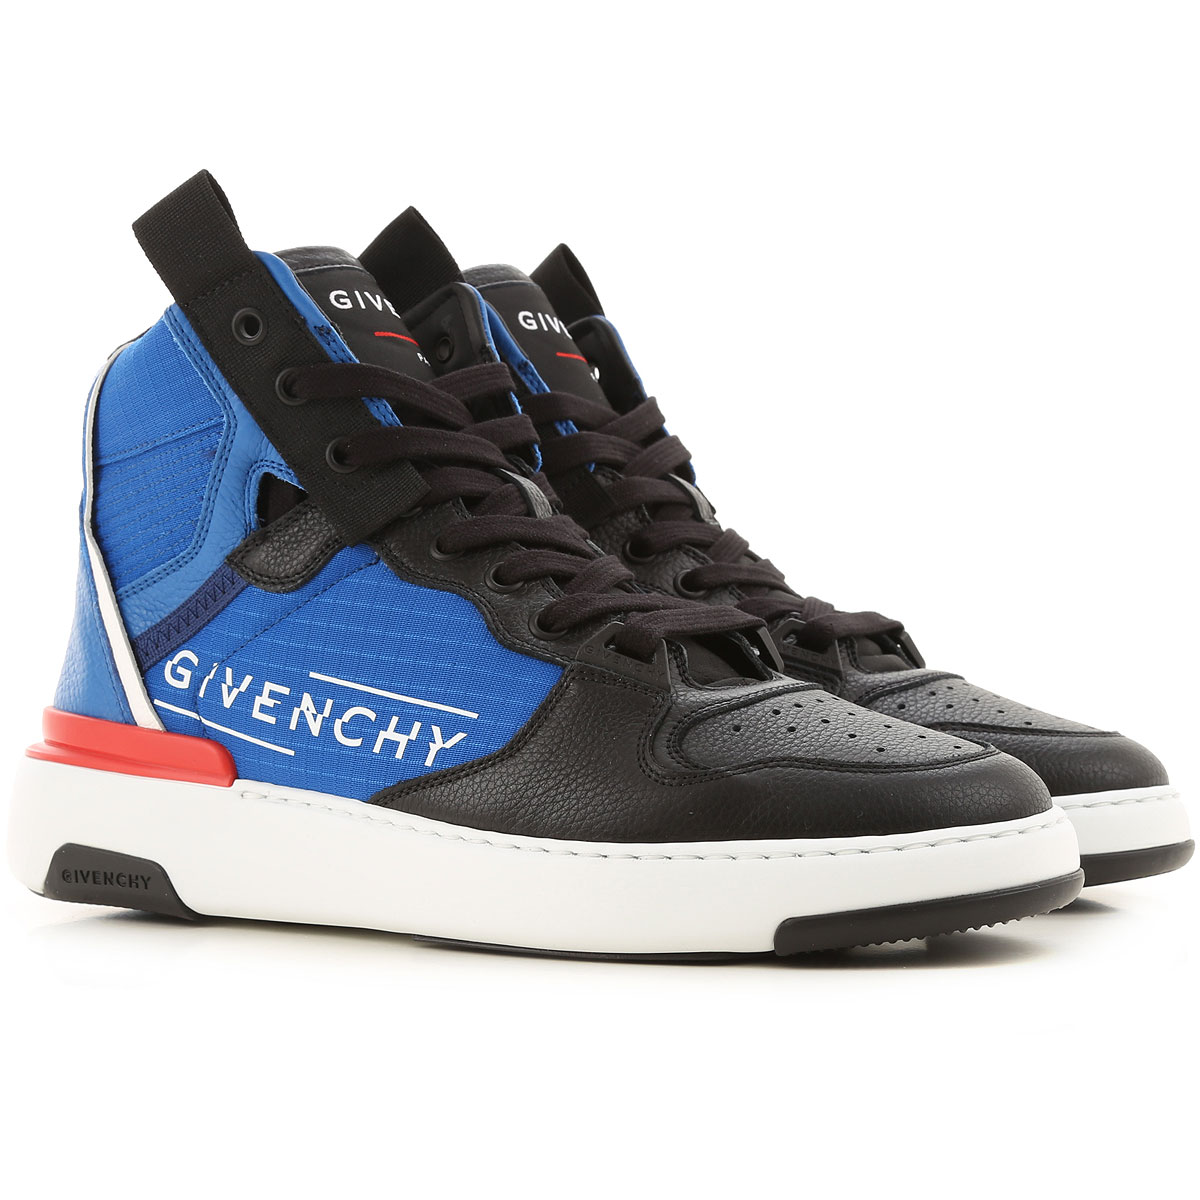 Mens Shoes Givenchy, Style code: bh002yh-0lx461-